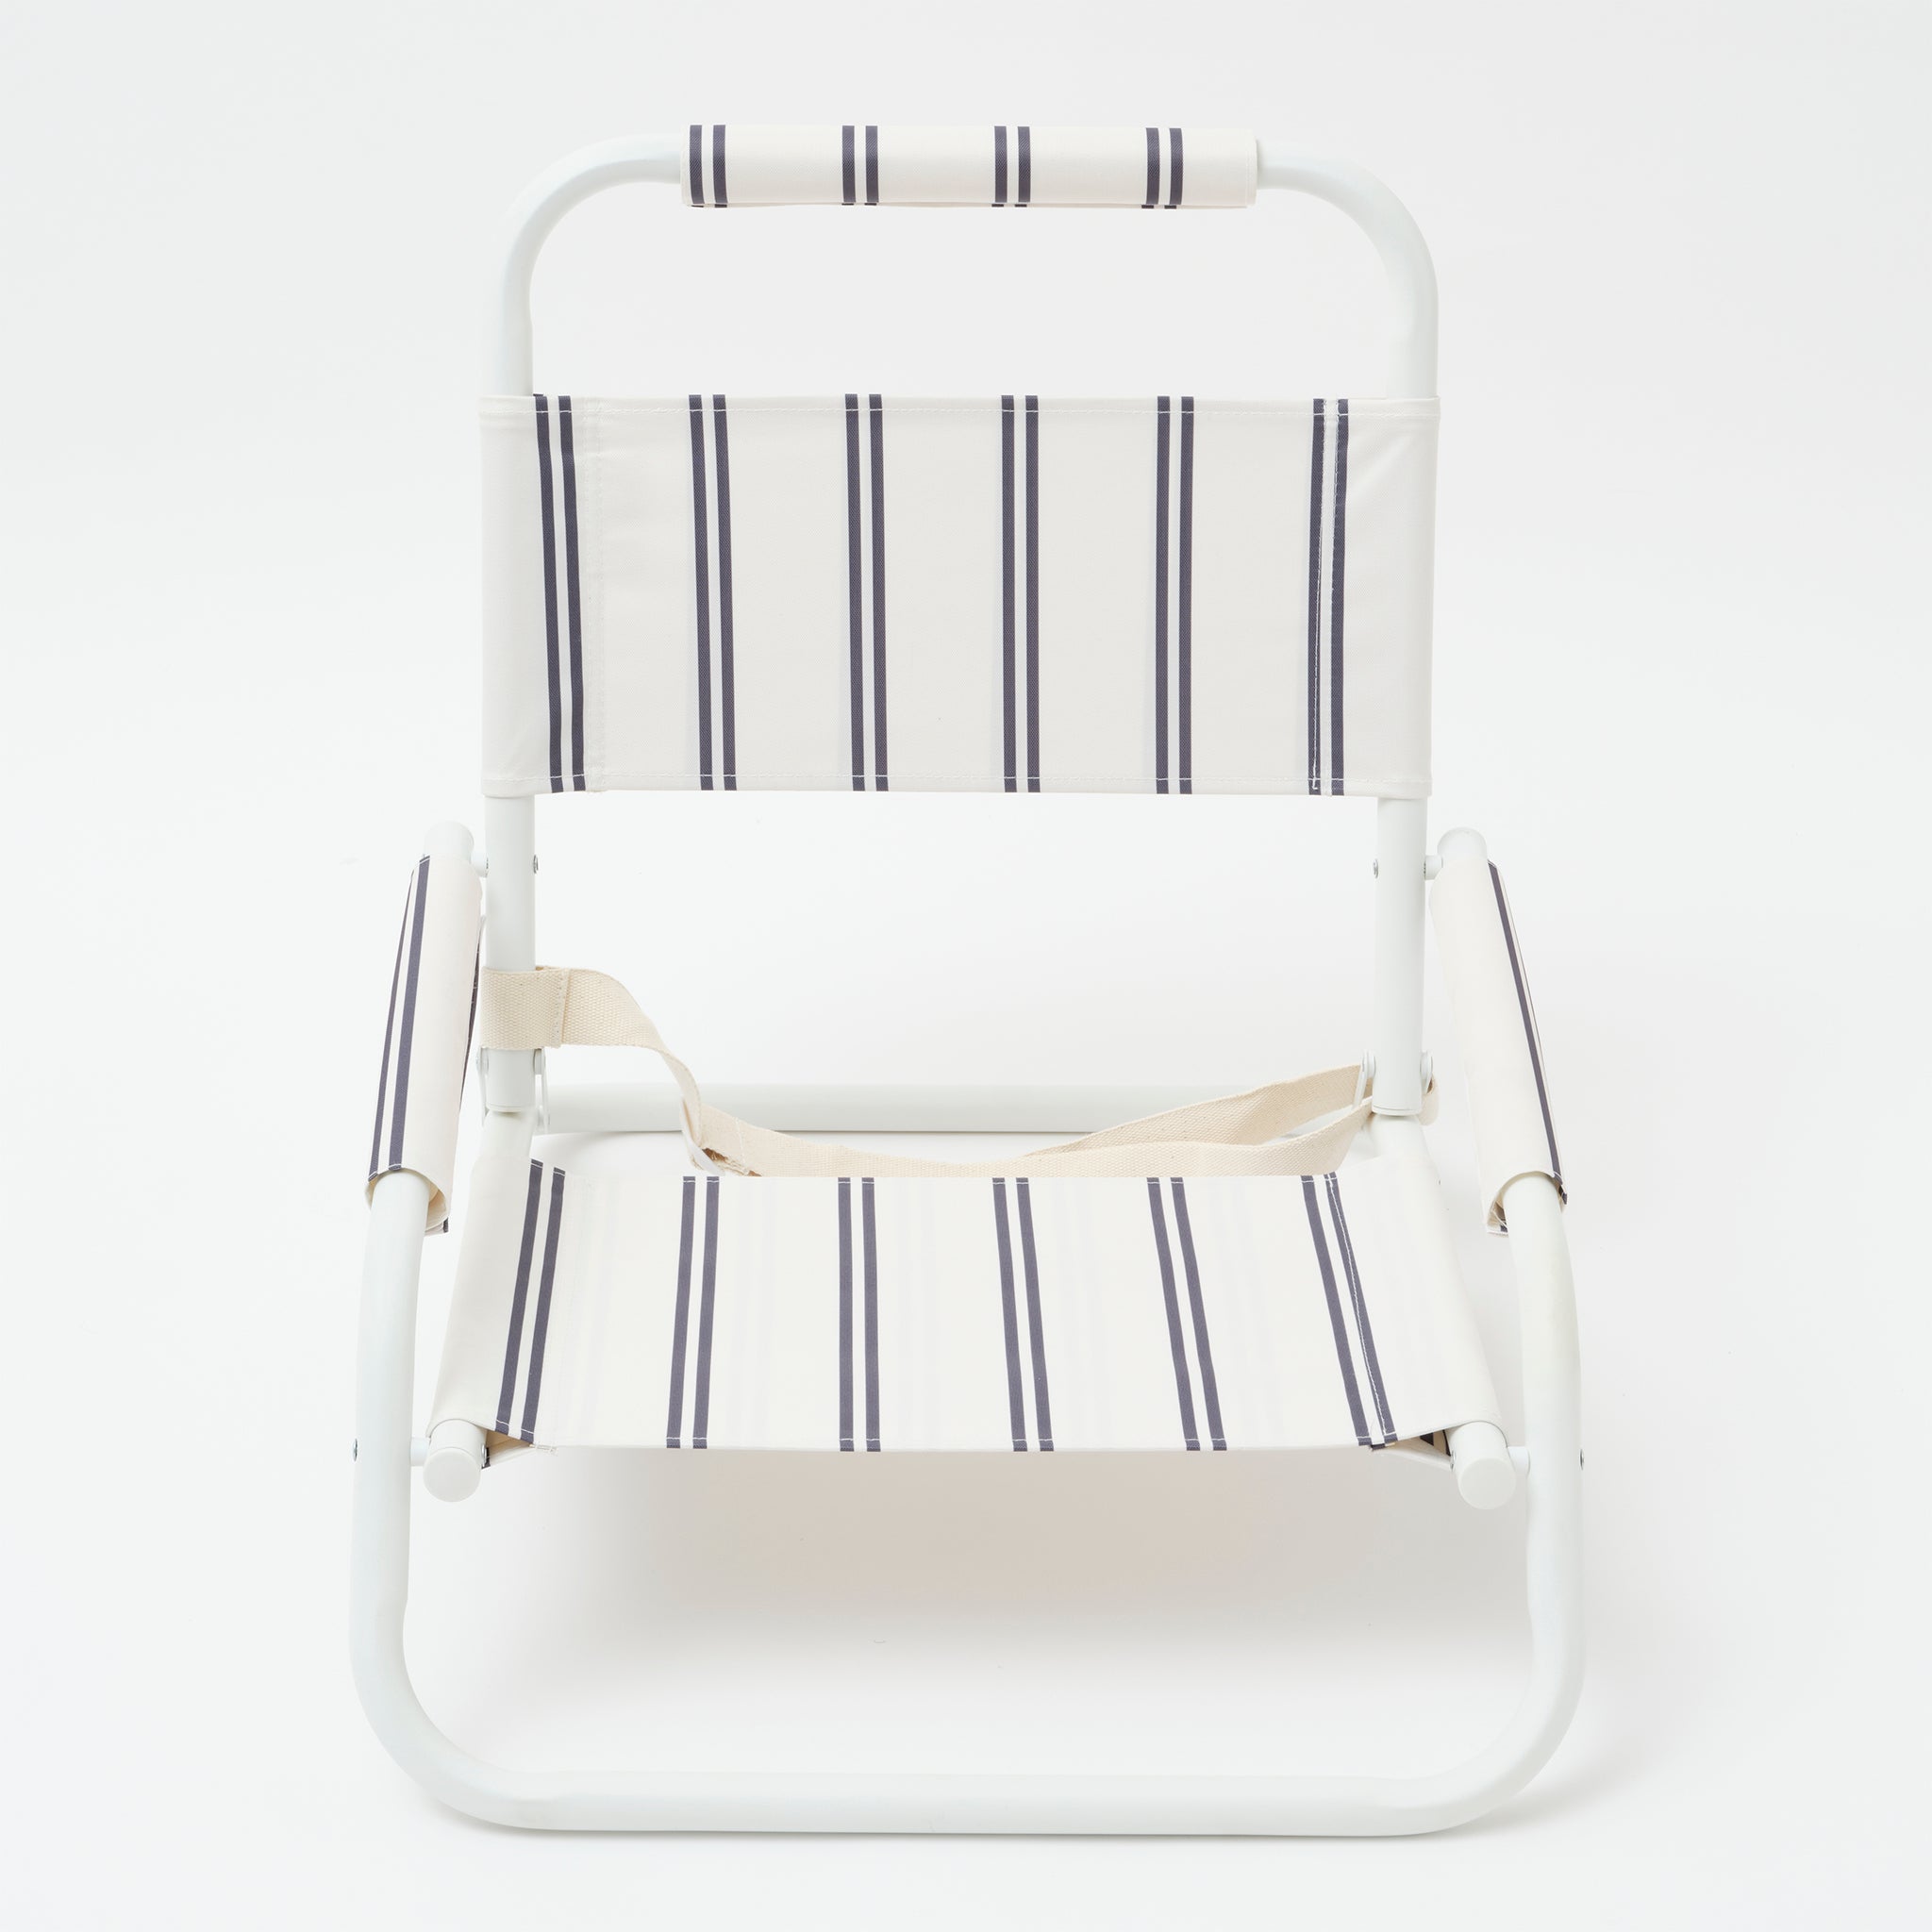 Beach Chair Charcoal Stripe-Travel & Outdoors-Sunny Life-The Bay Room